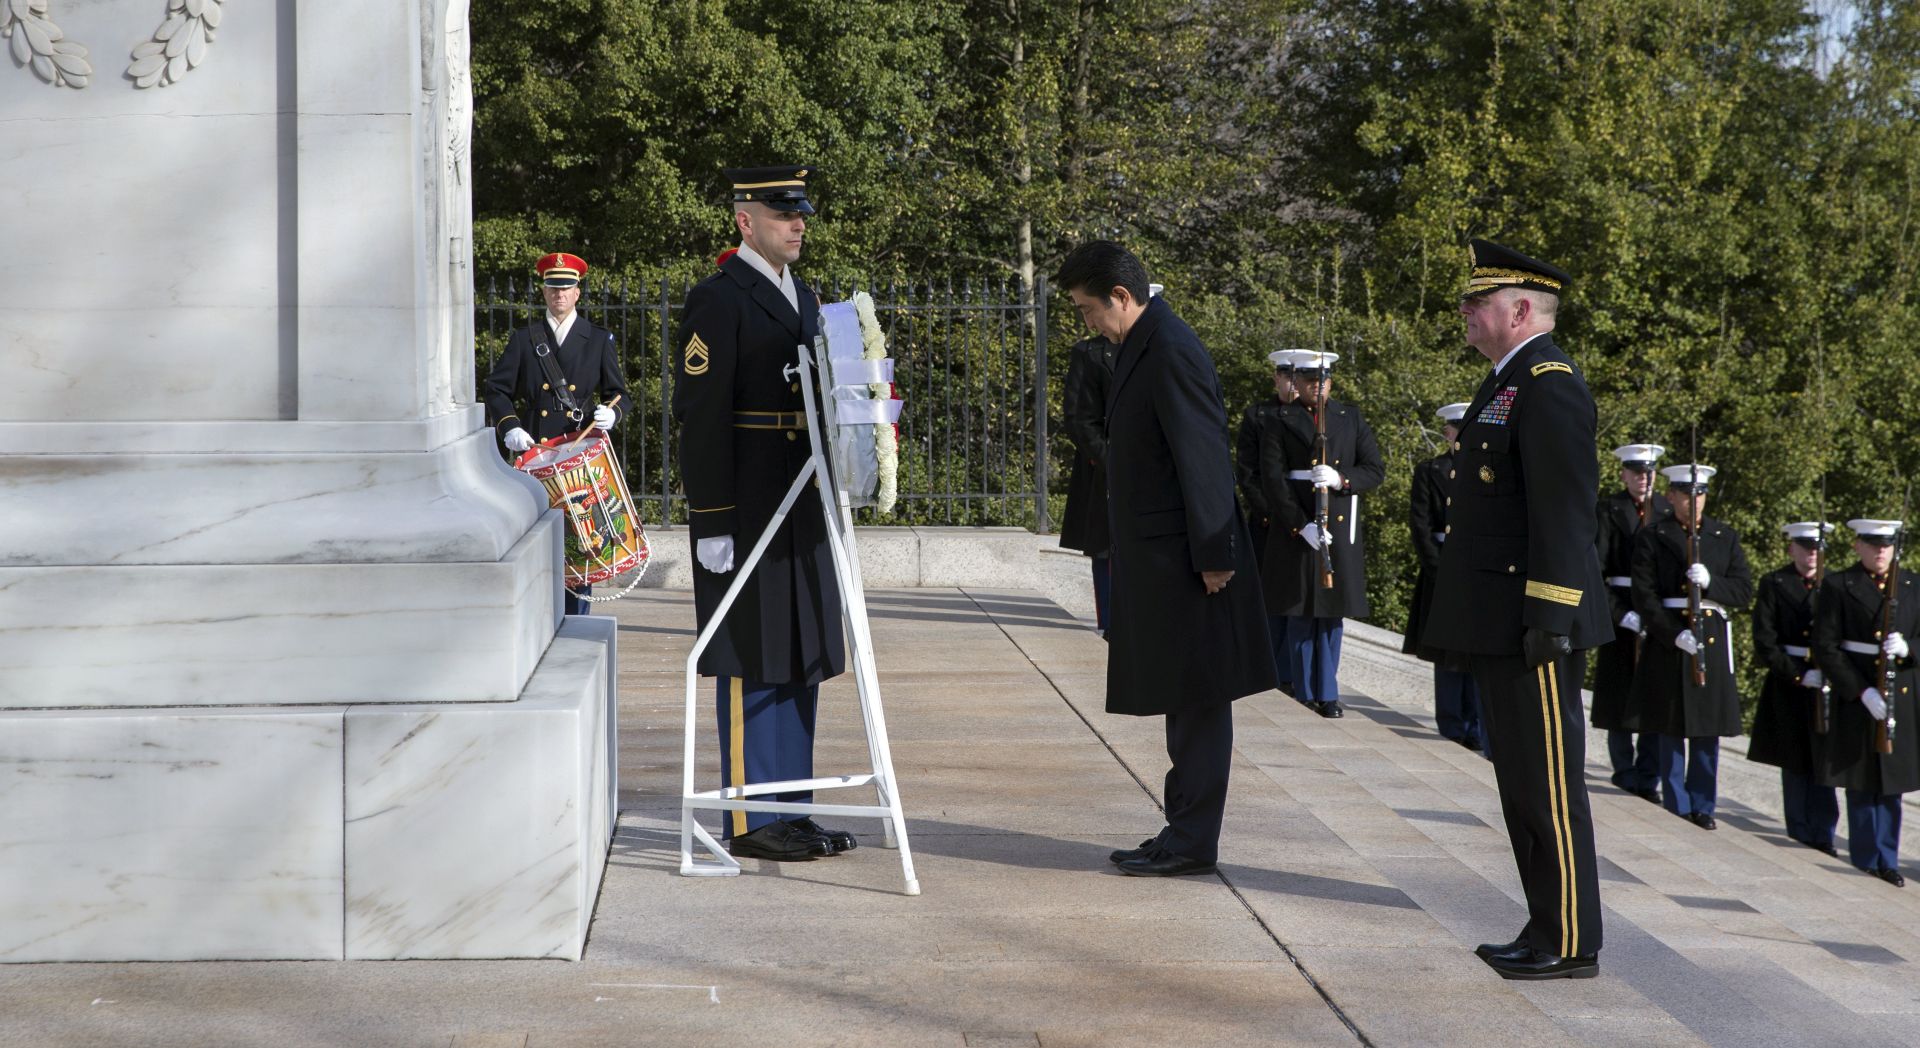 epa05783237 Prime Minister of Japan Shinzo Abe (C) bows as he participates in a wreath laying ceremony at the Tomb of the Unknown Soldier at Arlington National Cemetery in Arlington, Virginia, USA, 10 February 2017. Prime Minister Abe will meet with US President Donald J. Trump later in the day at the White House.  EPA/SHAWN THEW